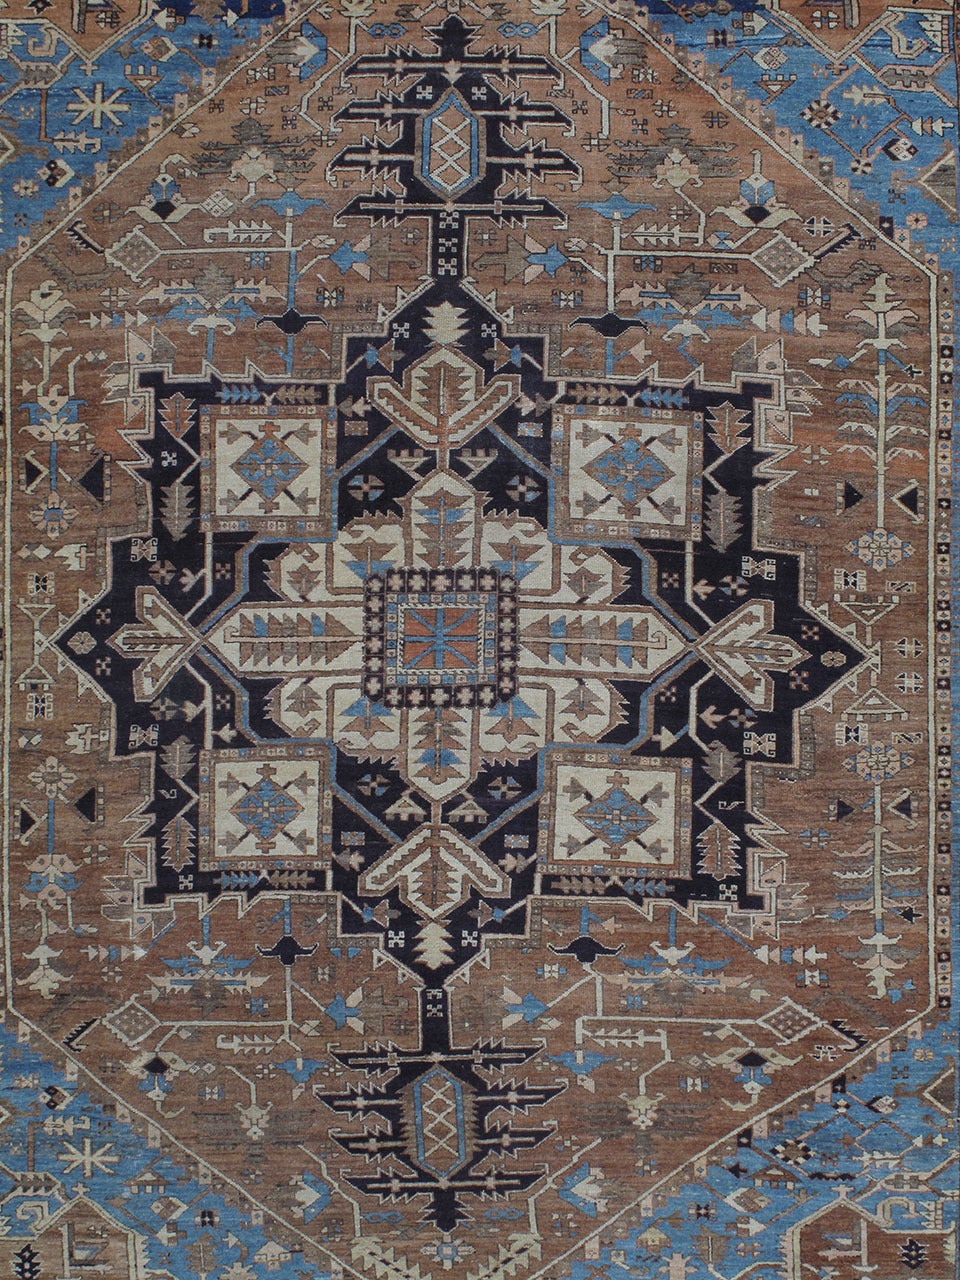 A very handsome antique carpet from the Heriz region of Northwestern Persia, a type that has been very popular in the West for over a century. The classical design is rendered in a very geometric style. The color palette is softer than usual,